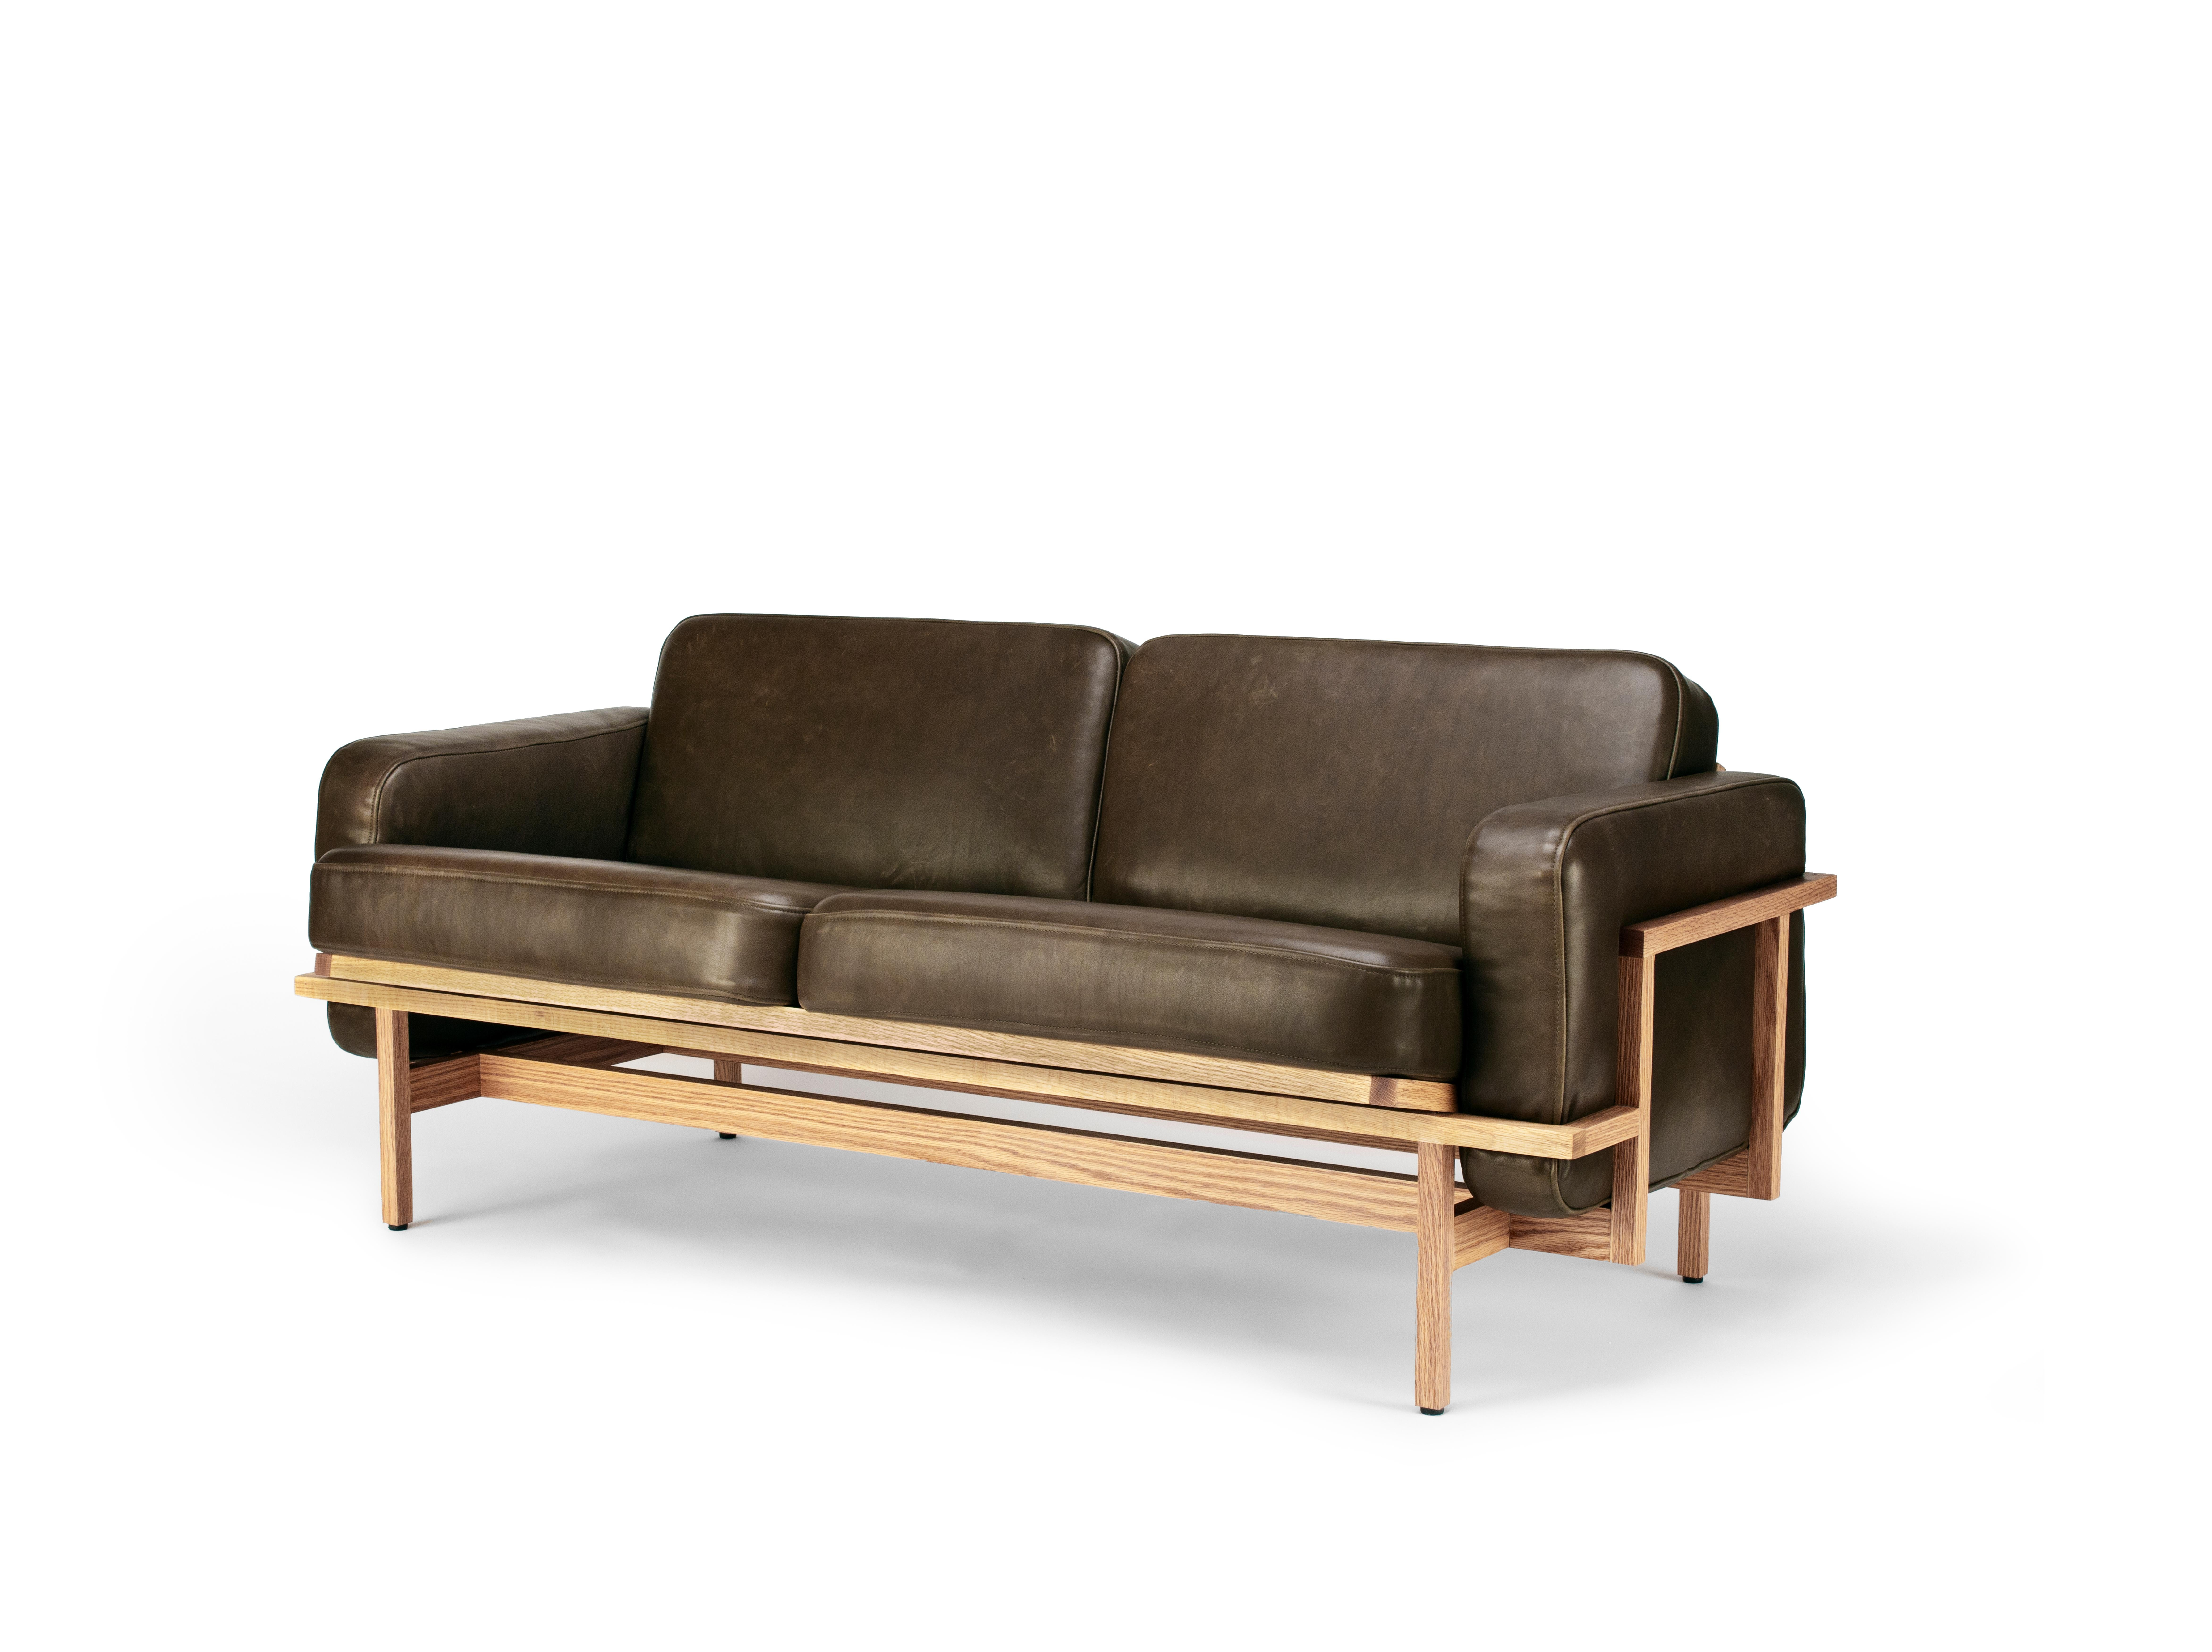 Hand-Crafted Loveseat Lccc, Mexican Contemporary Sofa by Emiliano Molina for Cuchara For Sale